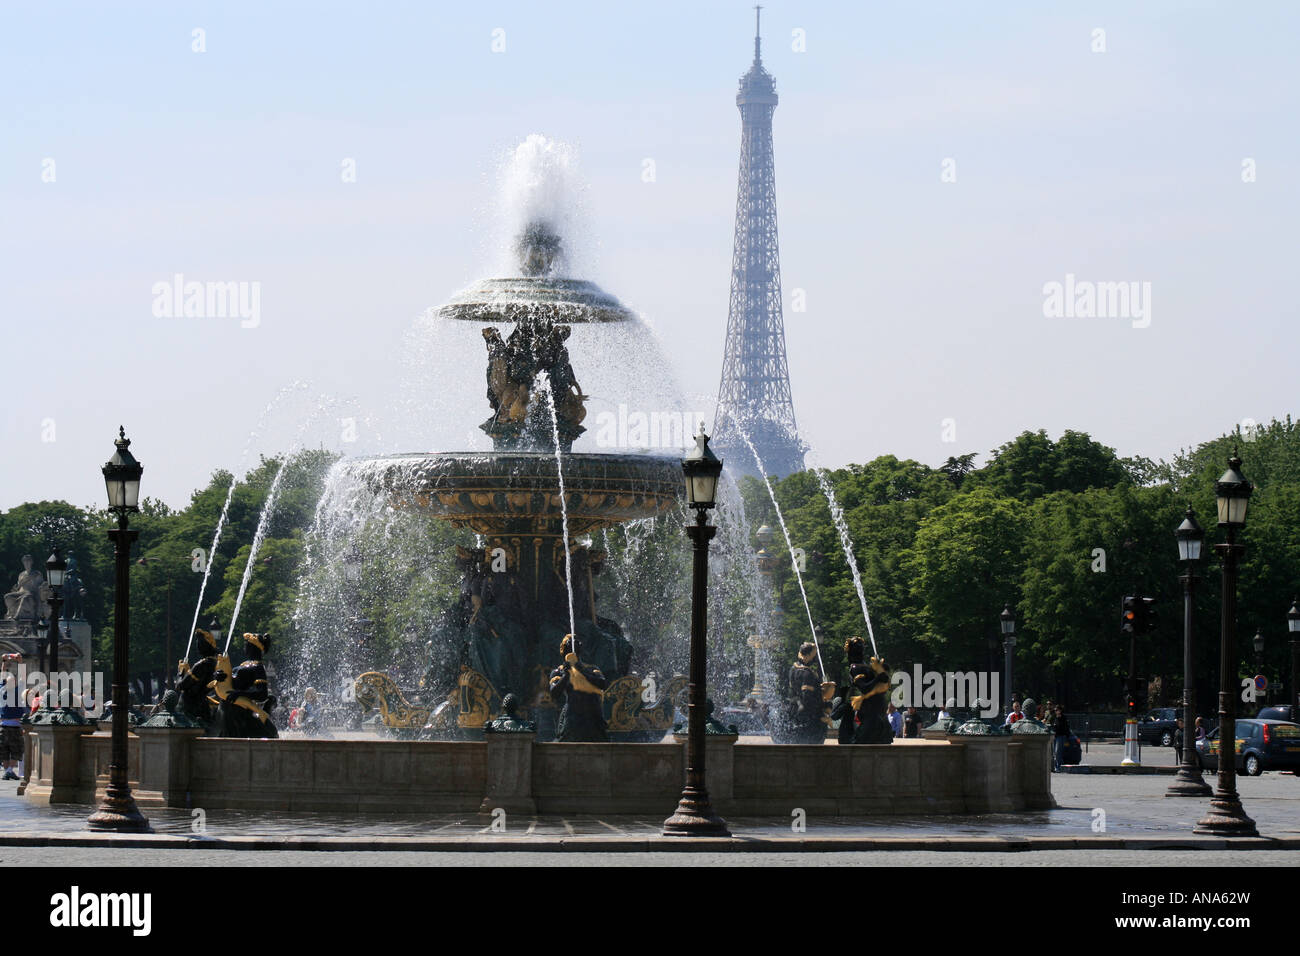 Fountains and statues on the Place de la Concorde with Eiffel Tower, Paris Stock Photo